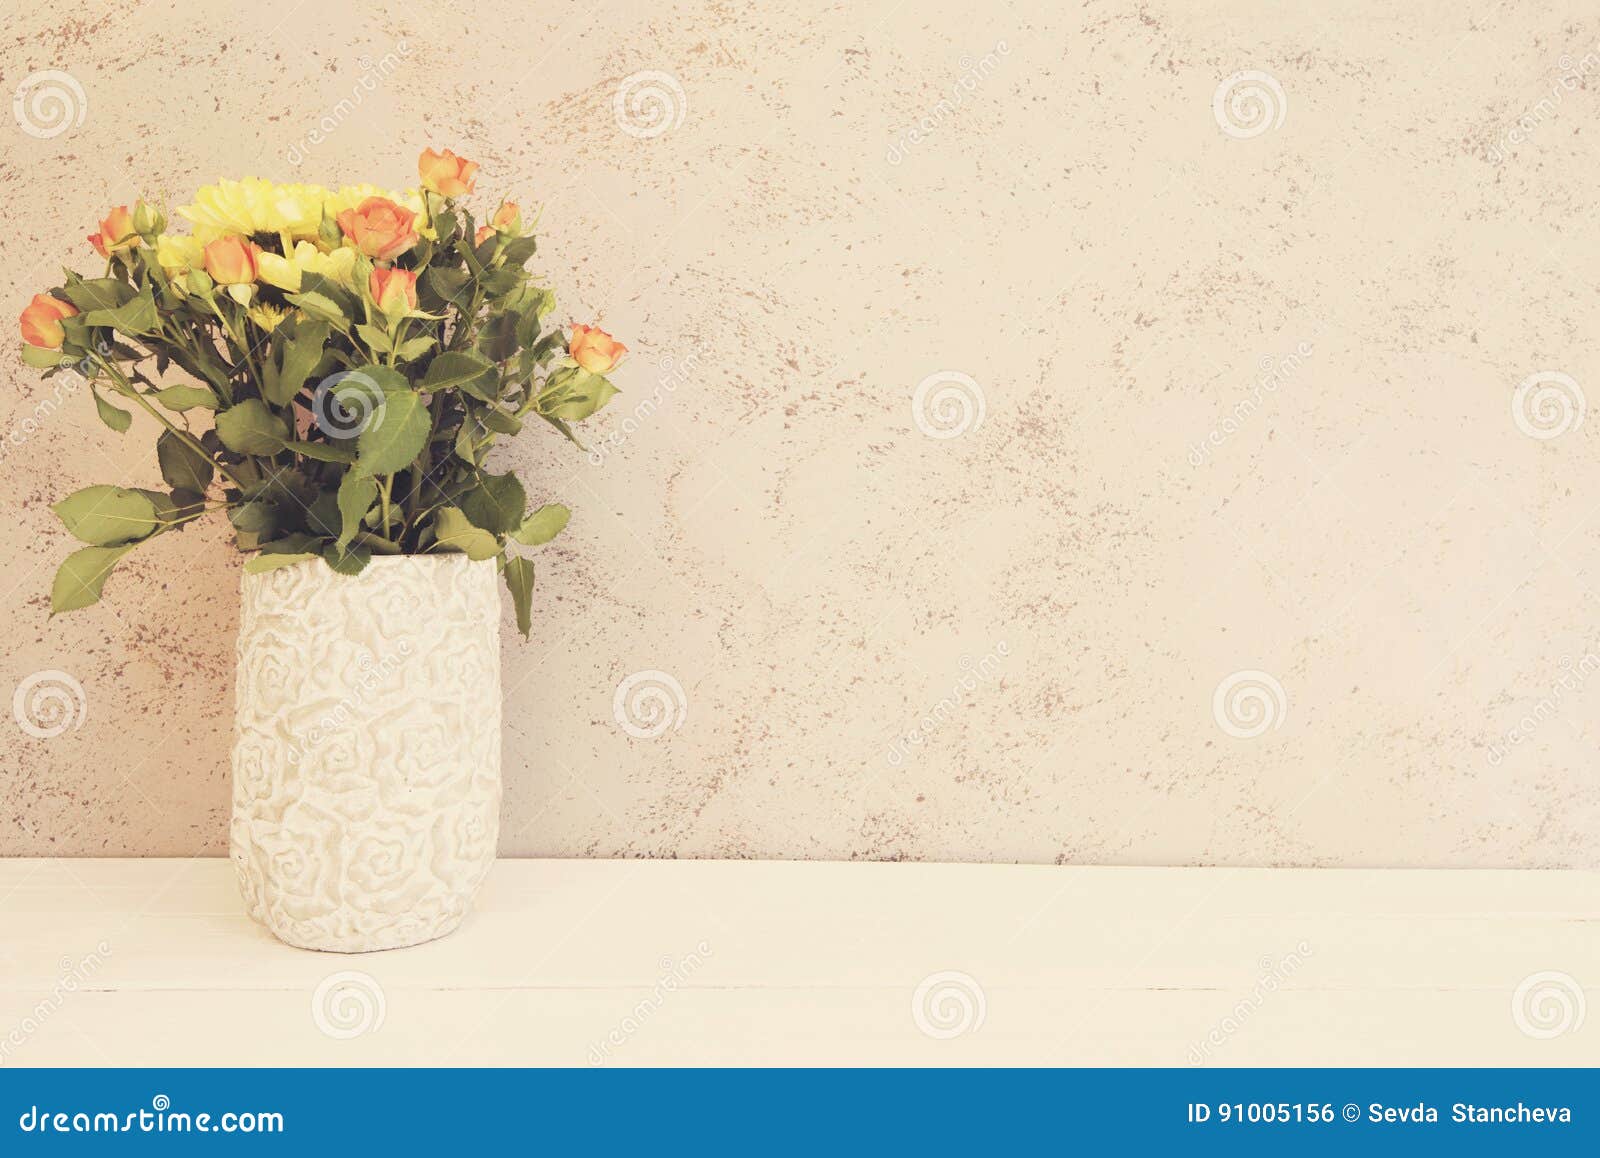 vase of flowers. rustic vase with orange roses and yellow chrysanthemums. white background, empty place, copy space. vintage tinte